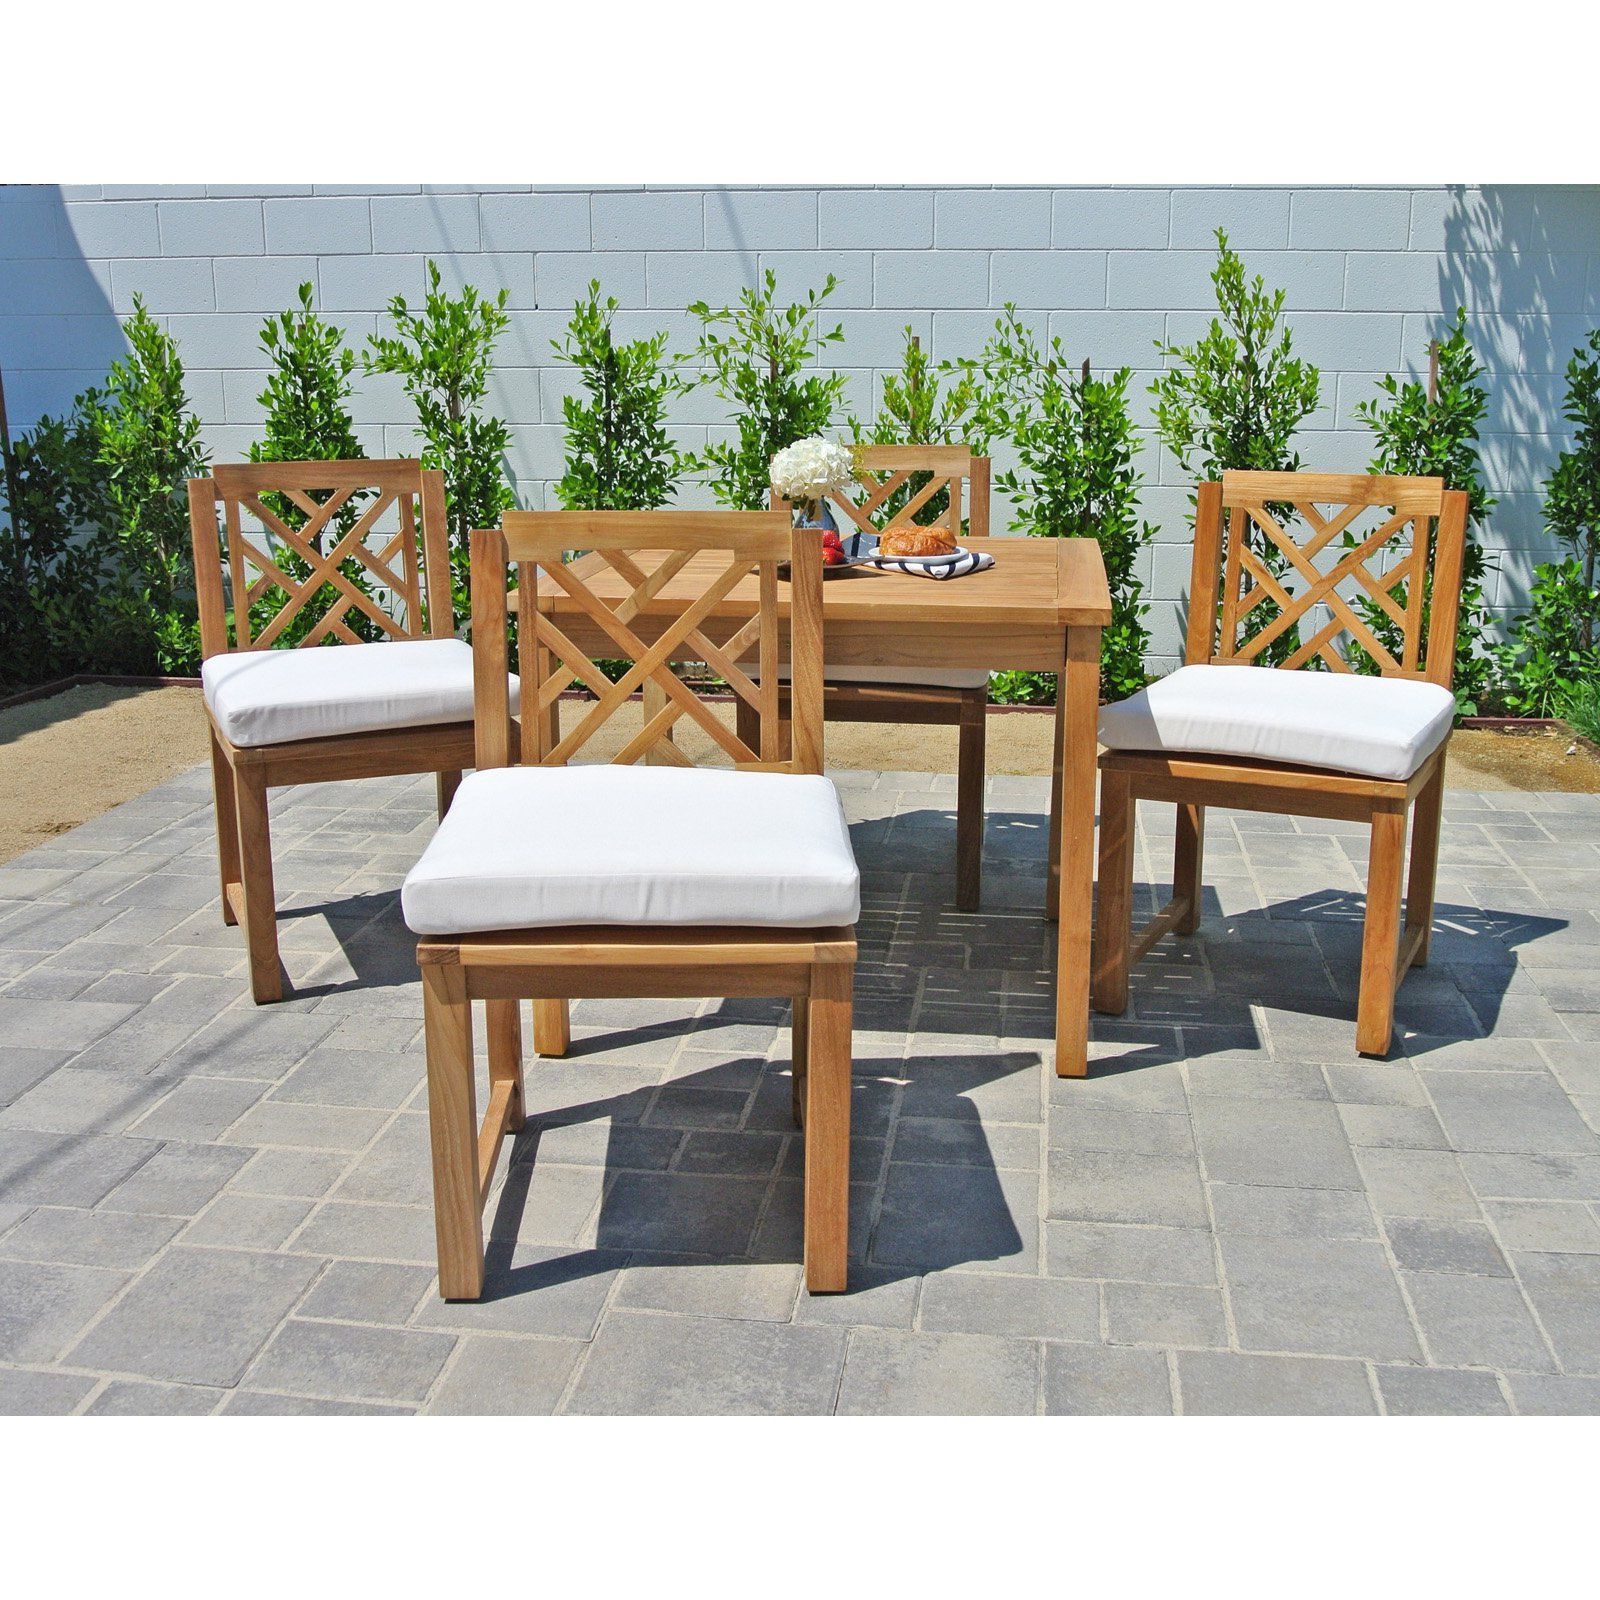 Outdoor Willow Creek Monterey 5 Piece Teak Patio Dining Set Canvas Pertaining To Most Popular Green 5 Piece Outdoor Dining Sets (View 4 of 15)